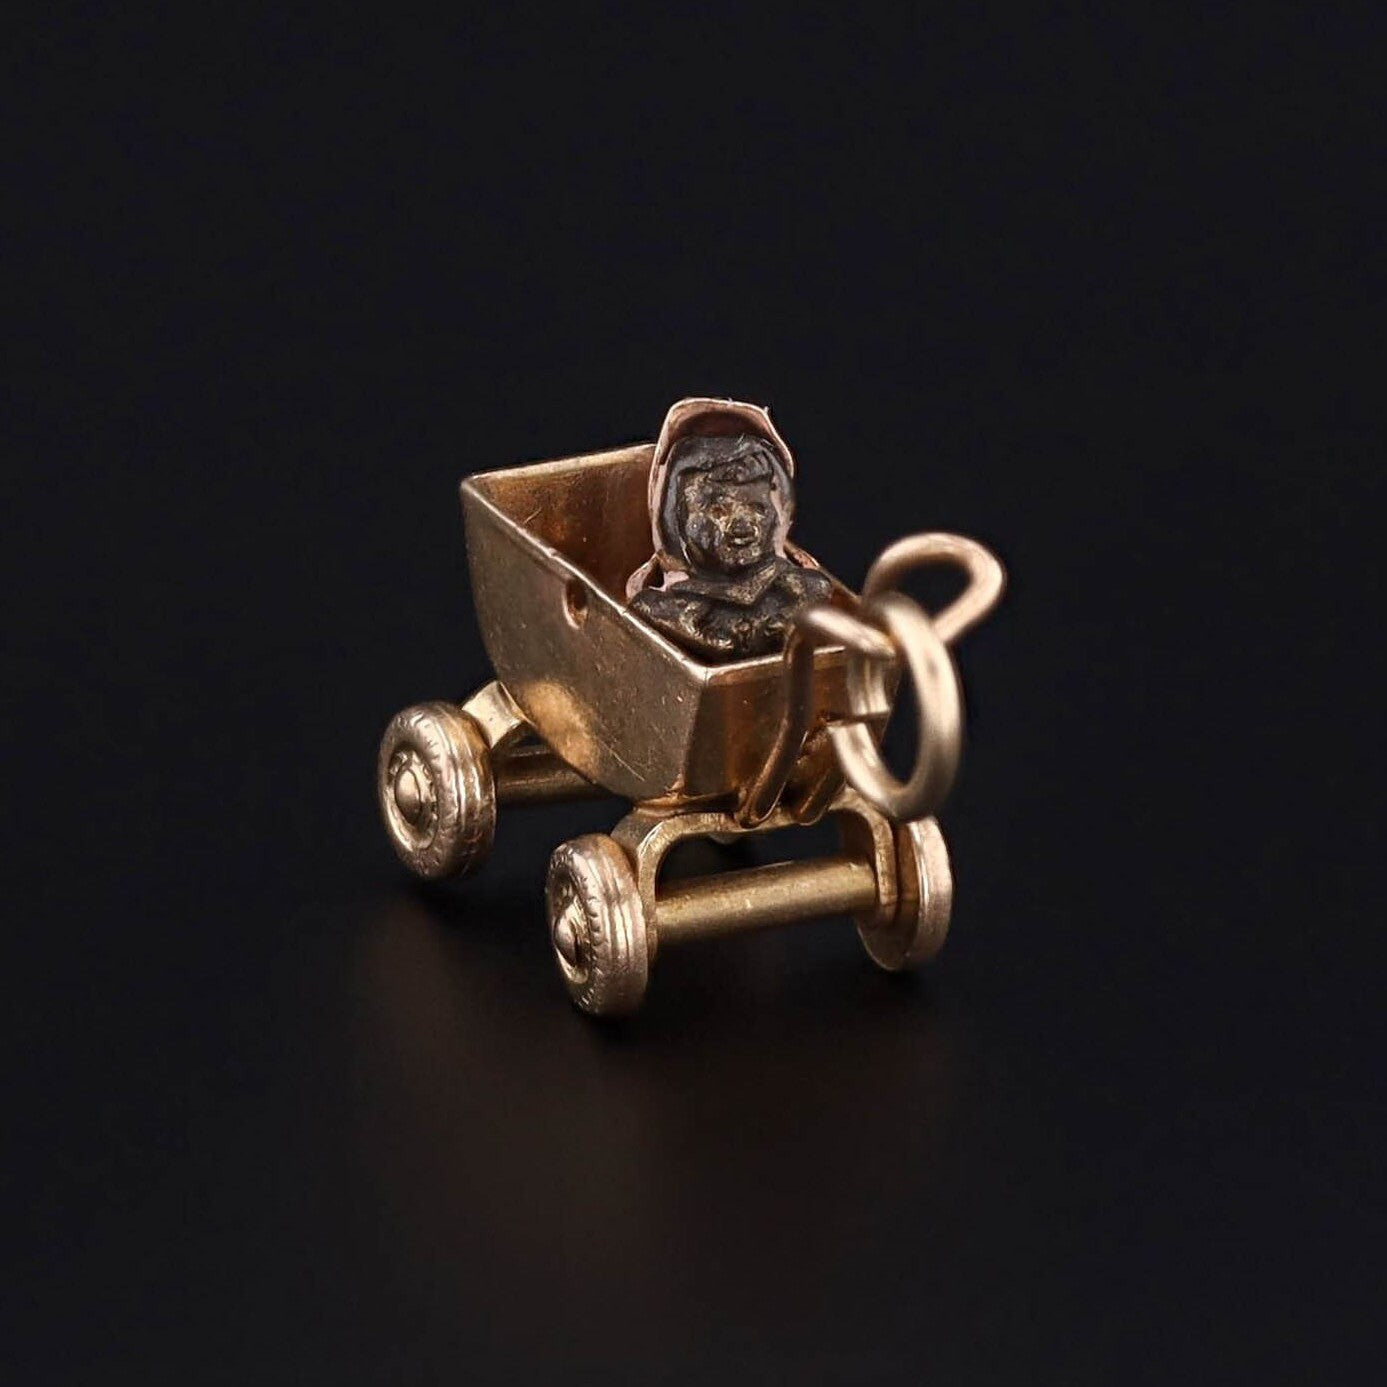 Vintage Baby in Carriage Charm of 14k Gold